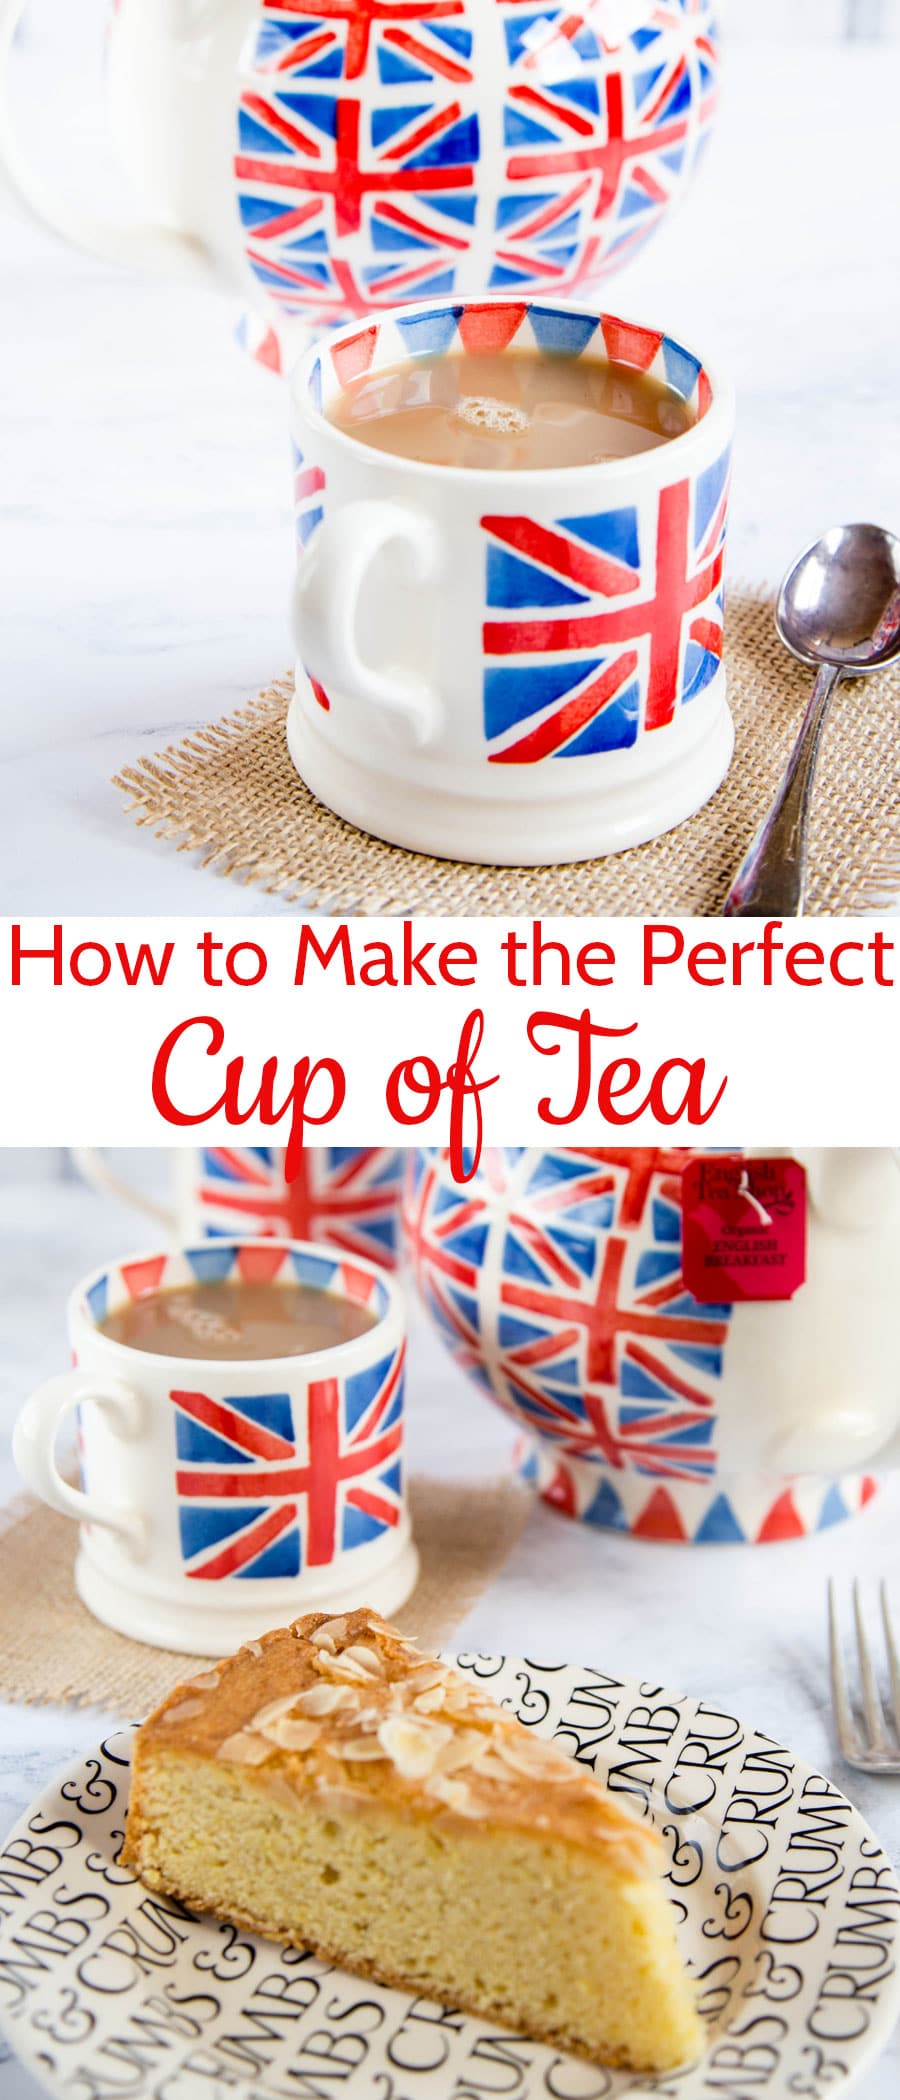 Taking a dash of care when making tea brings great rewards of flavour. Follow our six point plan for a great tasting cuppa.